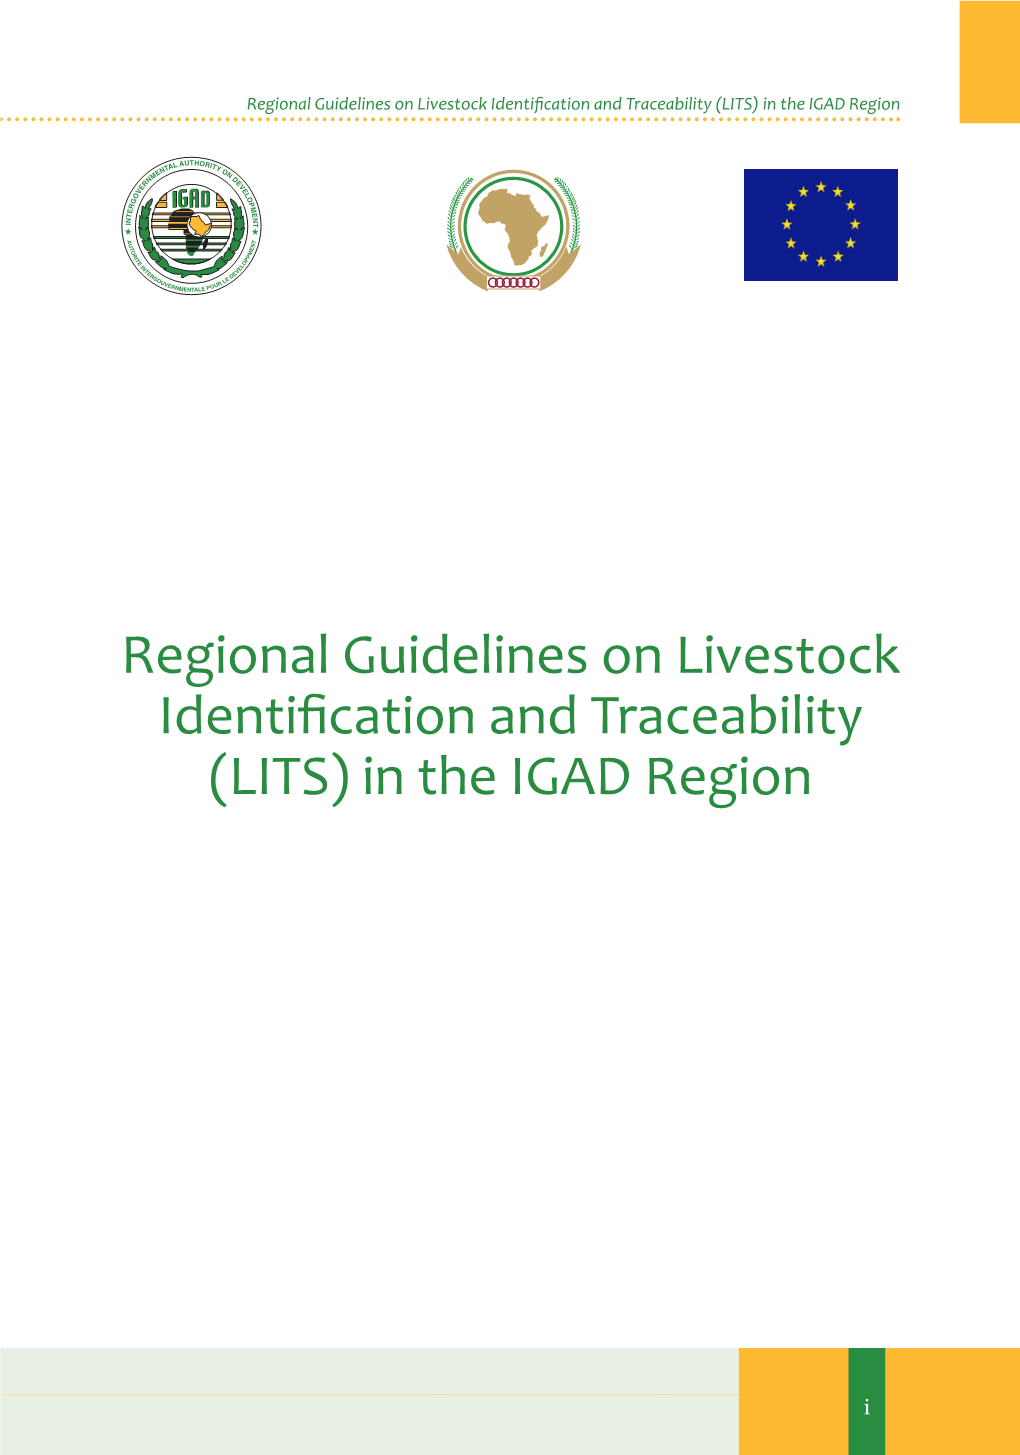 Regional Guidelines on Livestock Identification and Traceability (LITS) in the IGAD Region